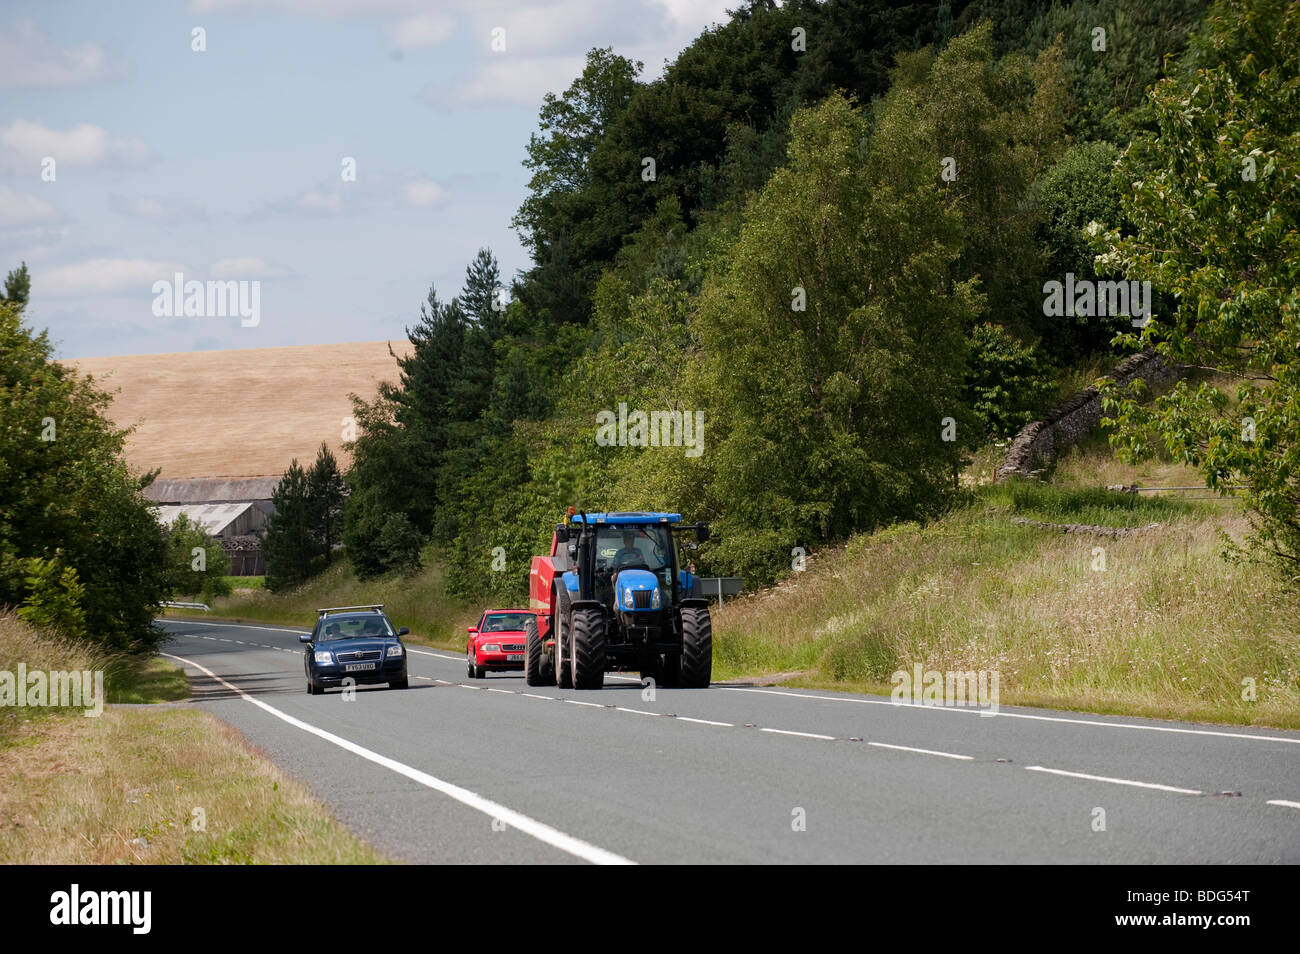 Tractor being overtaken by a car on a country road. Stock Photo